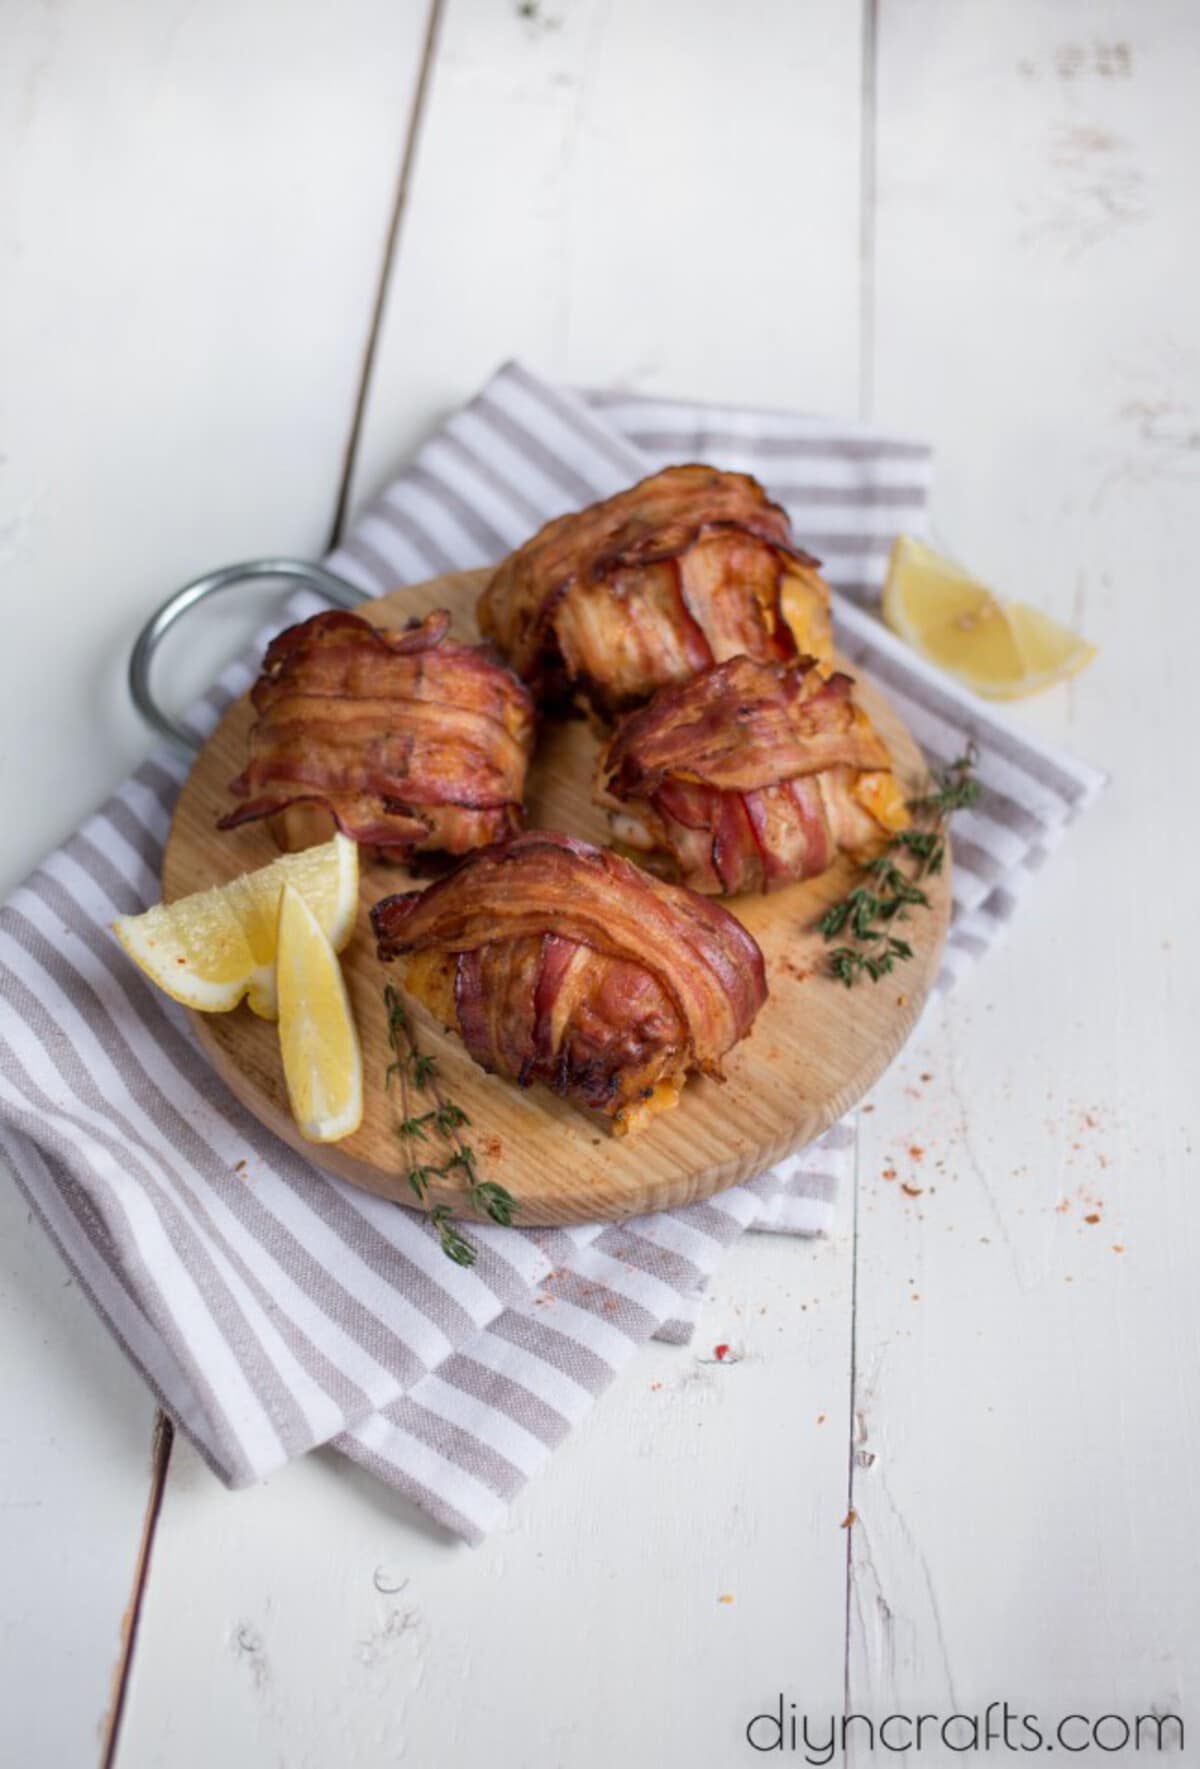 Bacon wrapped chicken on wood platter